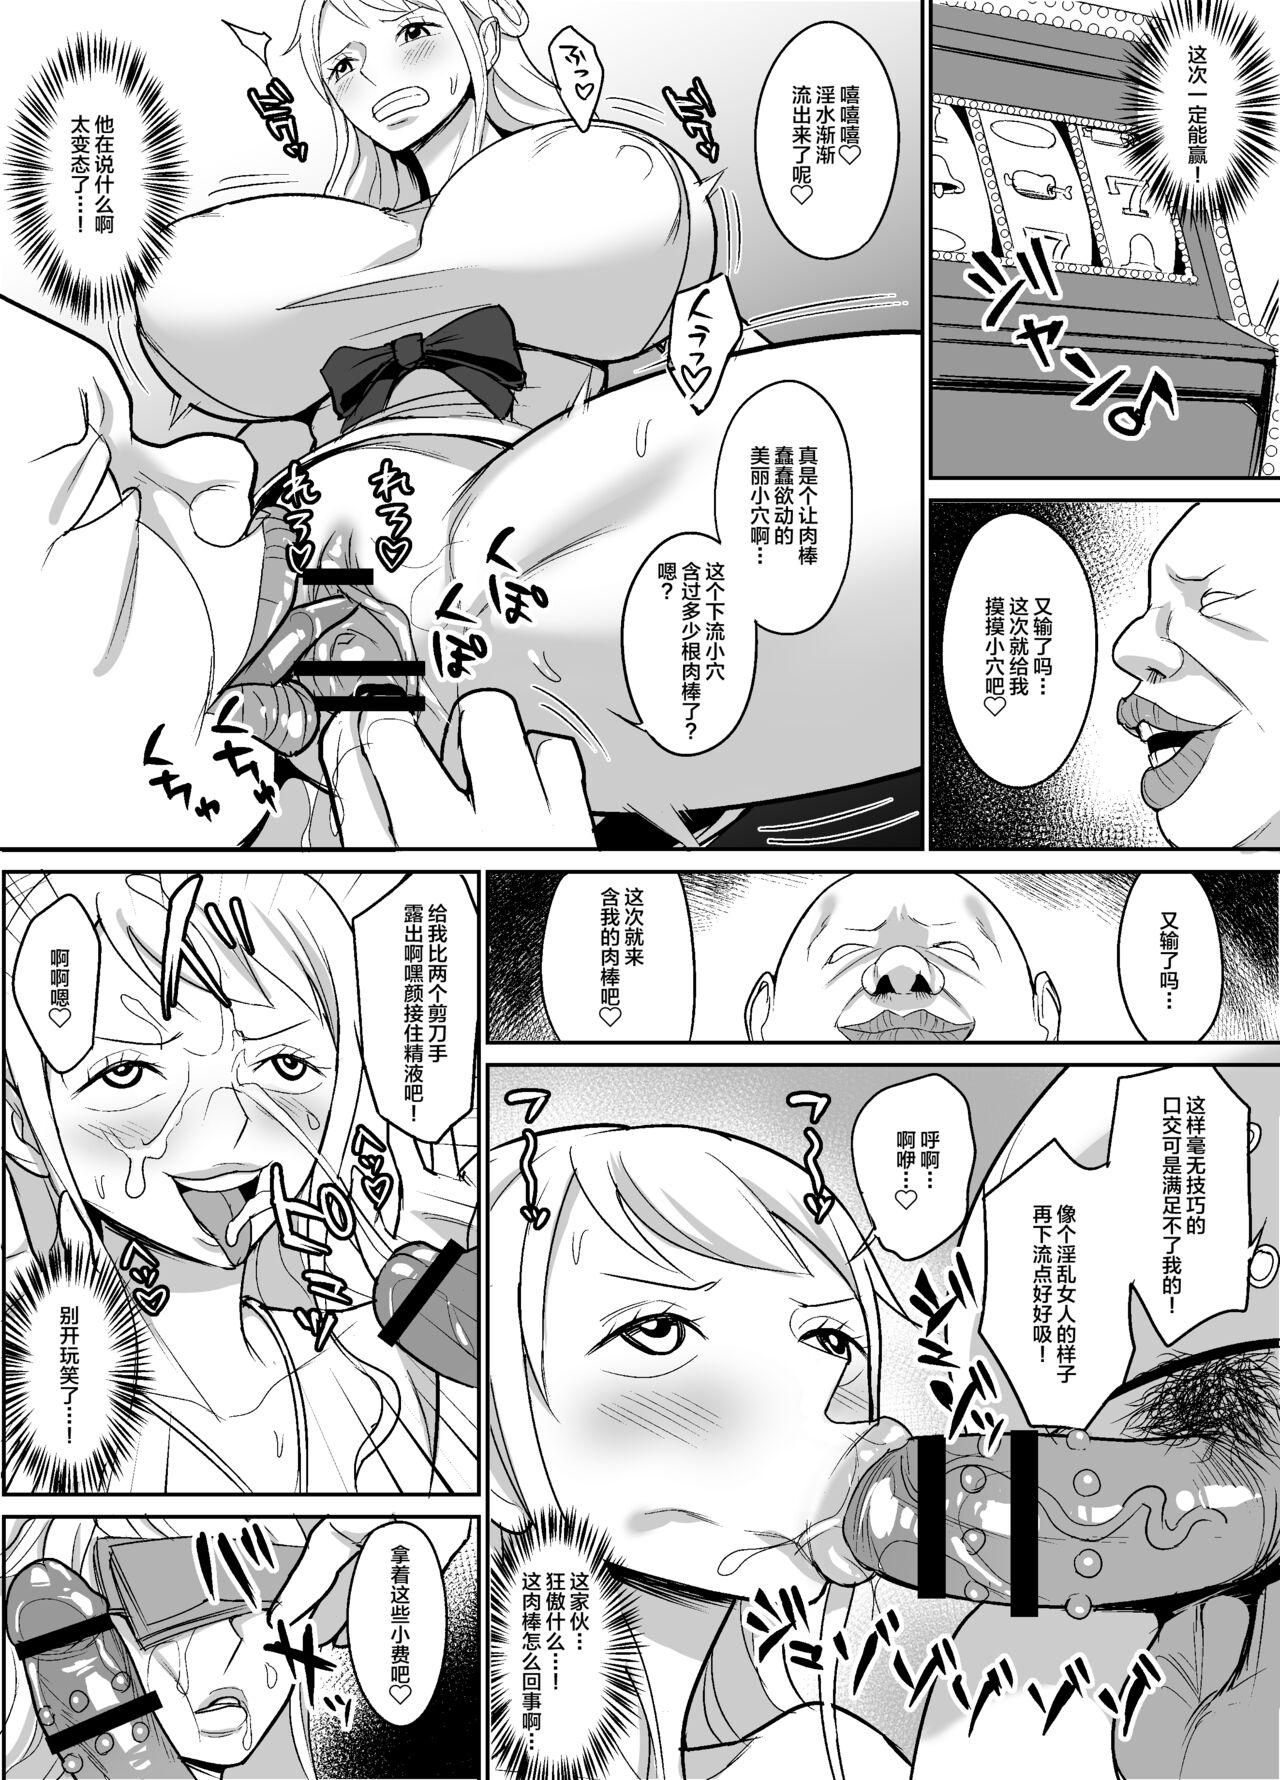 Gaycum Nami Ver. Gold - One piece Gang - Page 6